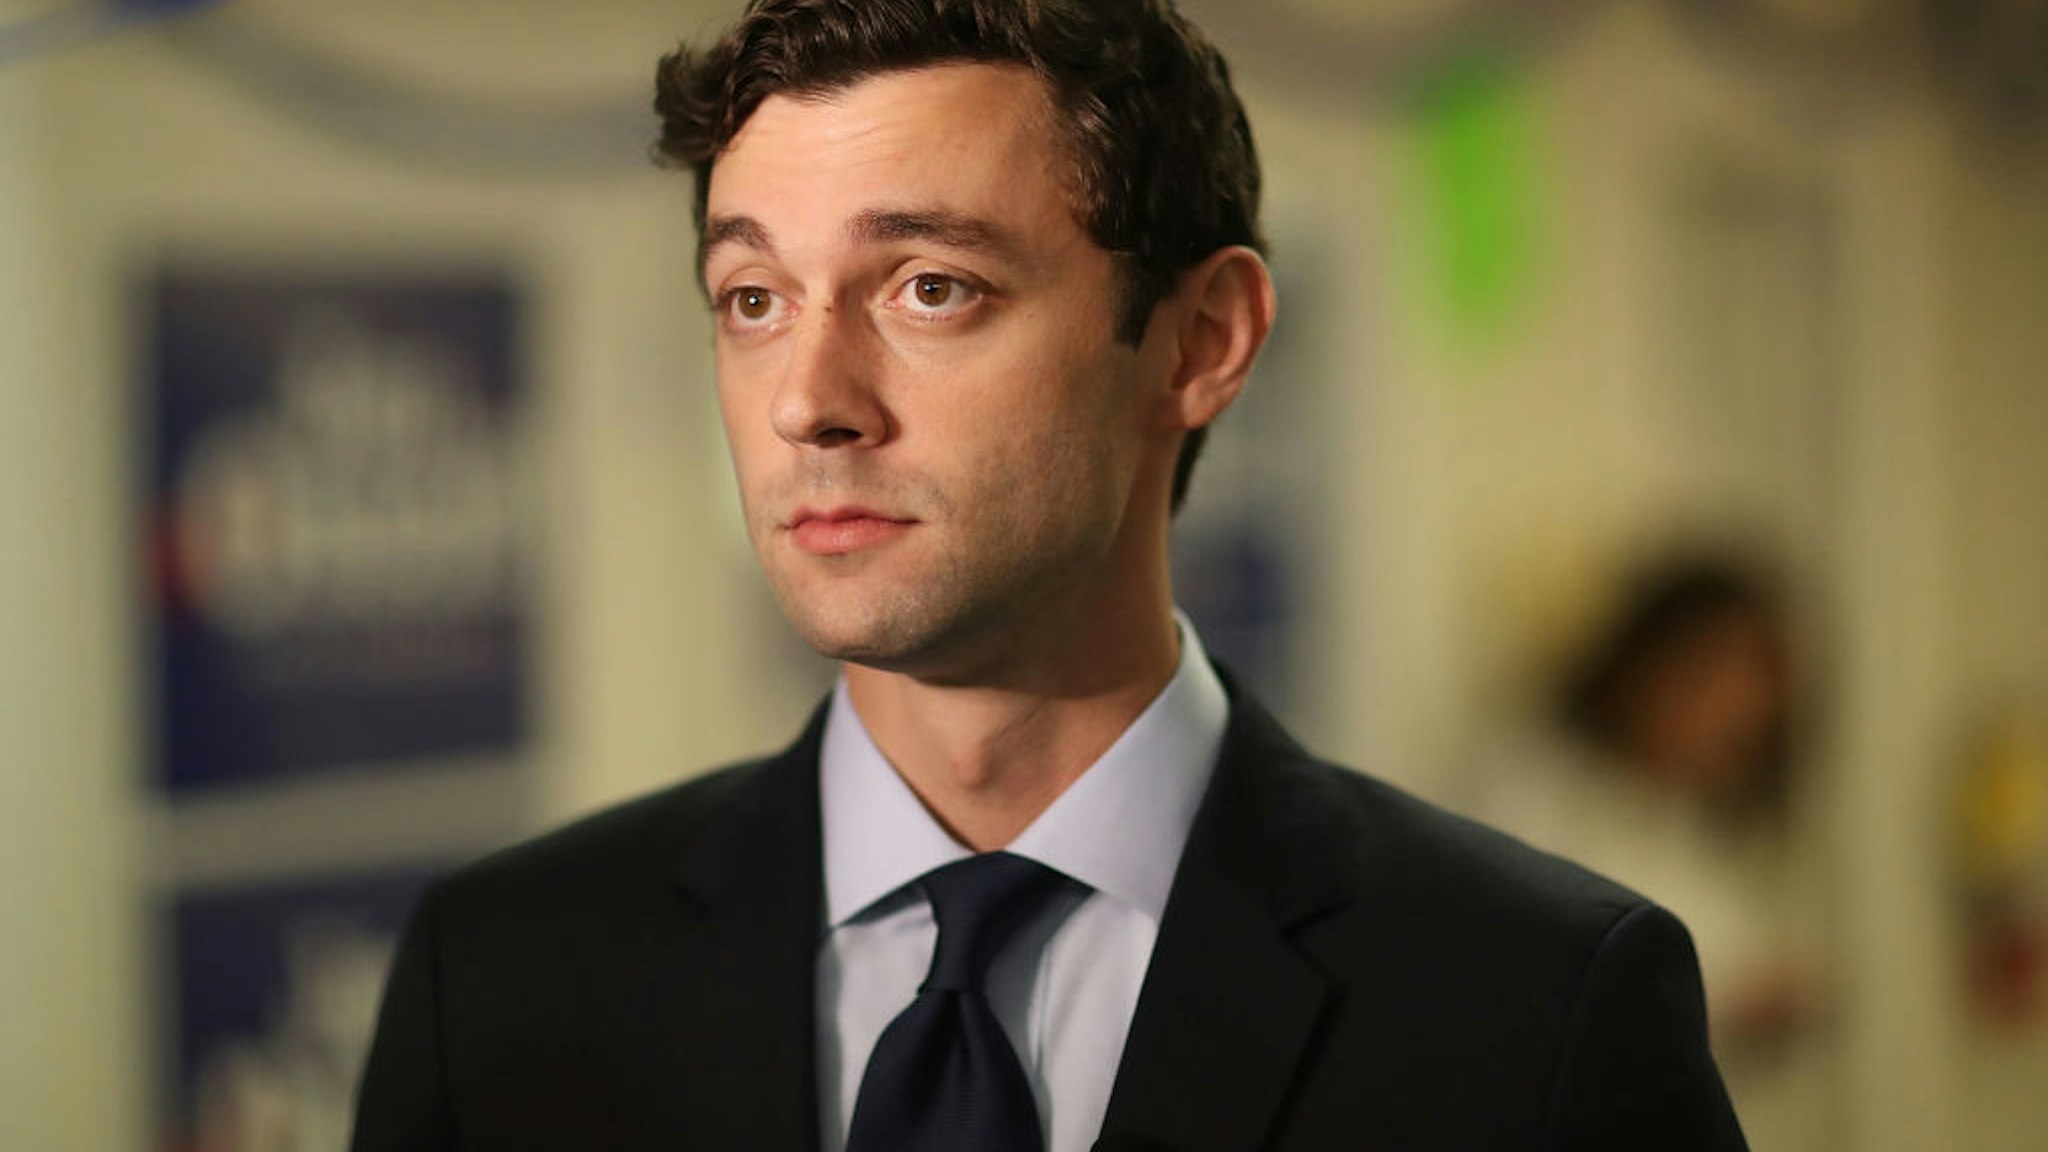 TUCKER, GA - JUNE 20: Democratic candidate Jon Ossoff visits a campaign office to speak with volunteers and supporters on Election Day as he runs for Georgia's 6th Congressional District on June 20, 2017 in Tucker, Georgia. Mr. Ossoff is running in a special election against the Republican candidate Karen Handel to replace Tom Price, who is now the Secretary of Health and Human Services. The election will fill a congressional seat that has been held by a Republican since the 1970s.